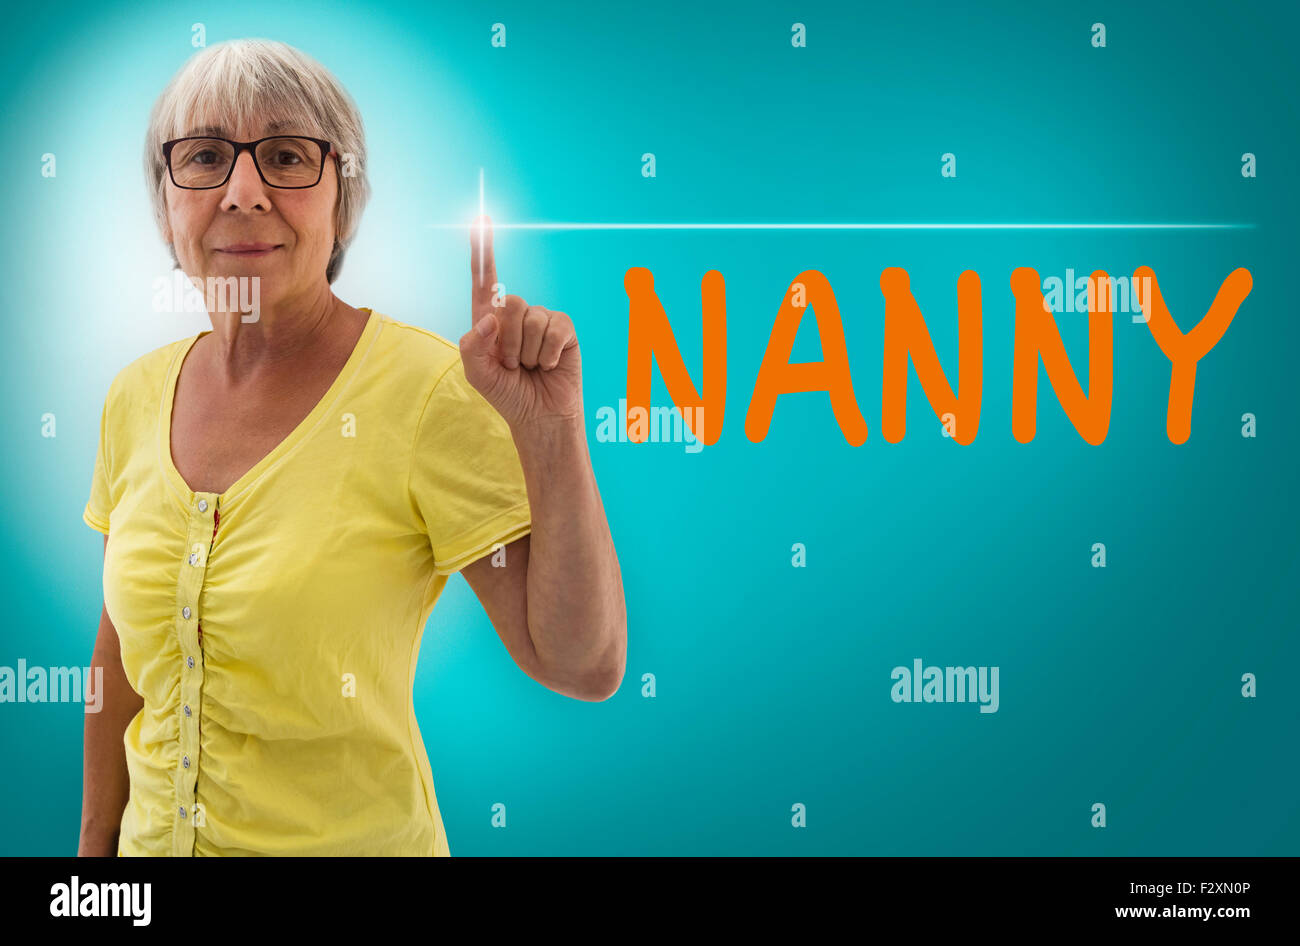 Nanny touchscreen is shown by Senior Woman concept. Stock Photo